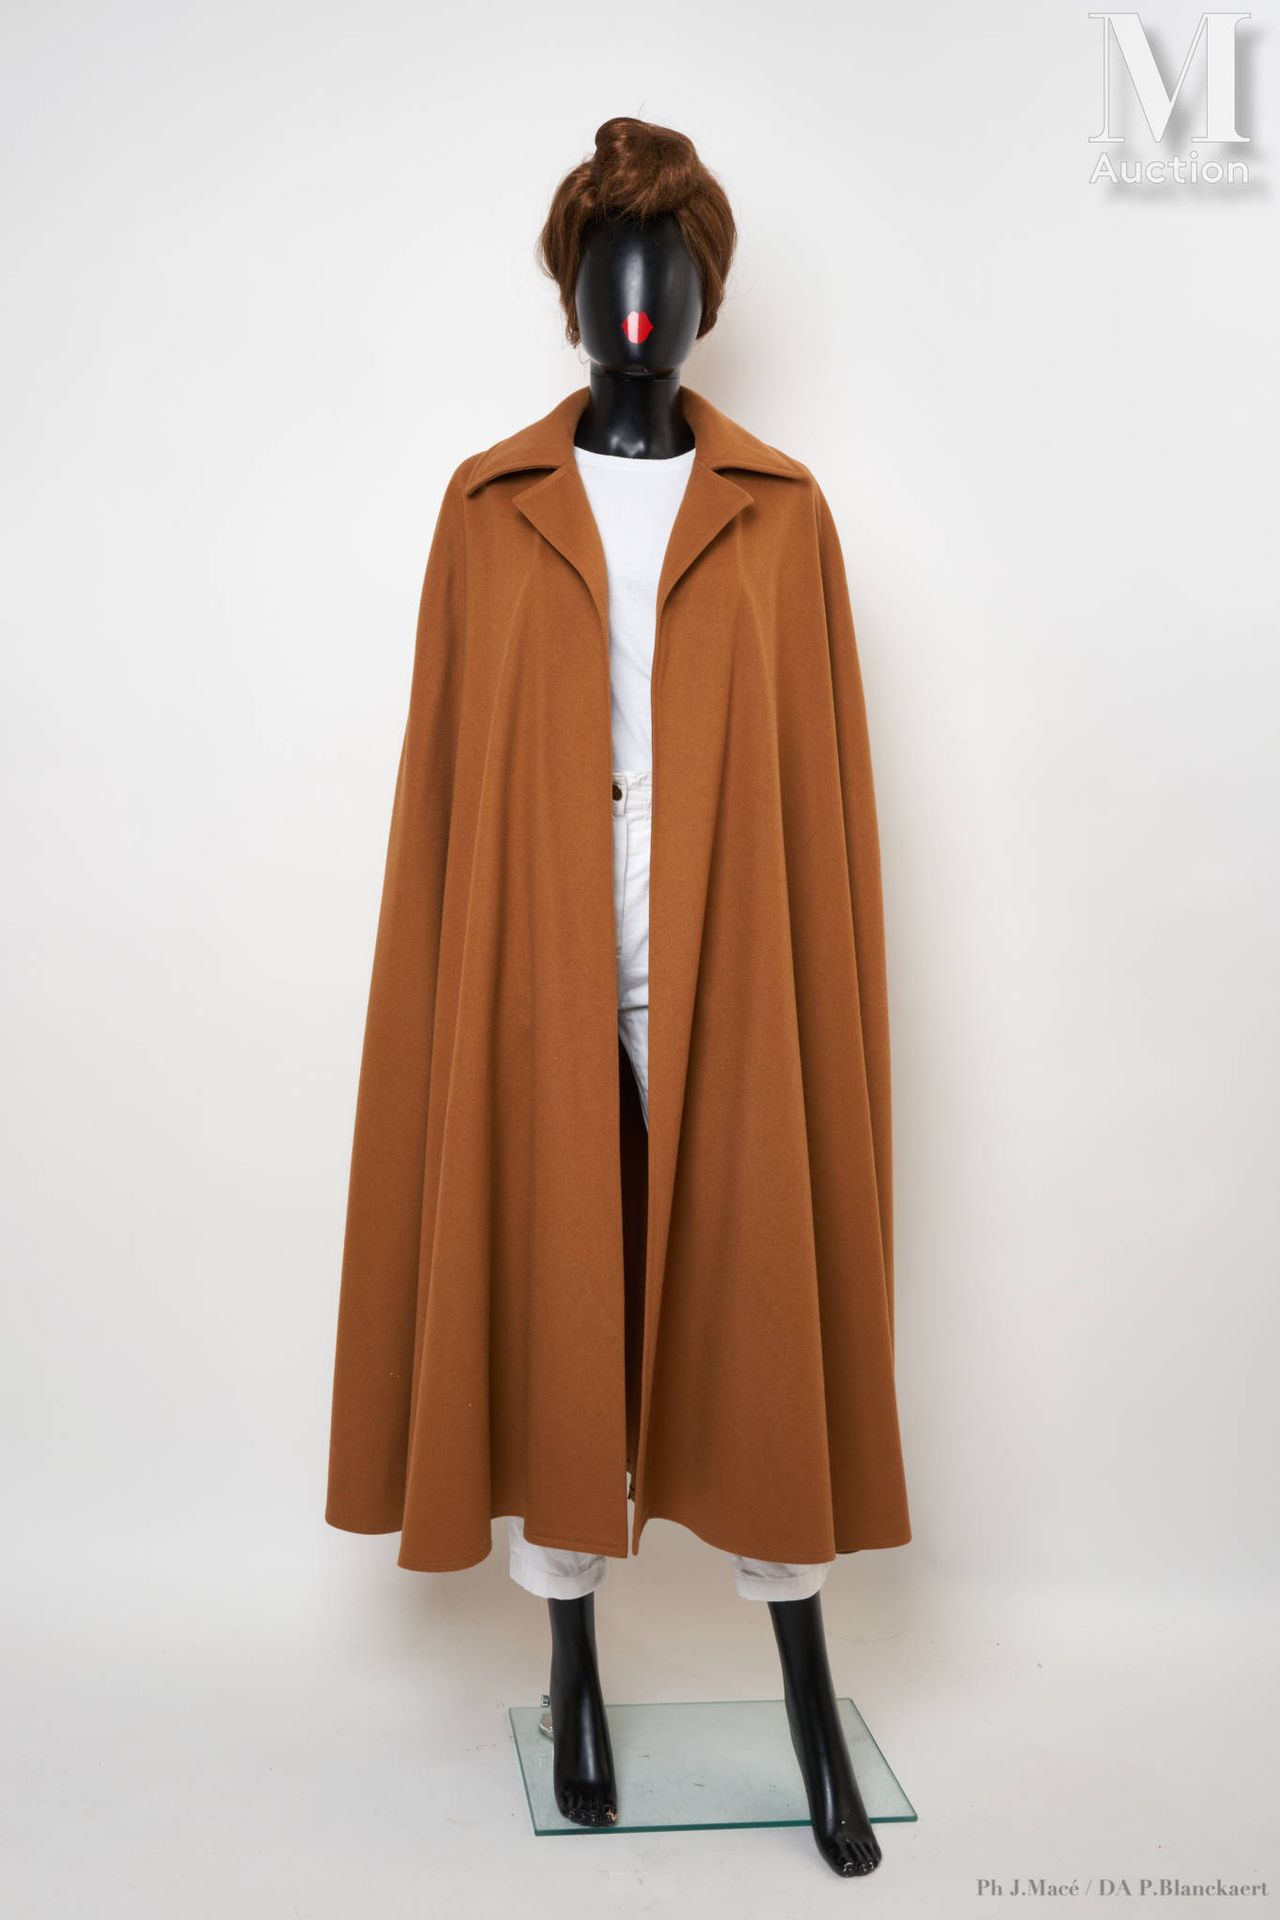 SAINT LAURENT RIVE GAUCHE - 1970's Cape
in camel wool
T. 38
Some small snags on &hellip;